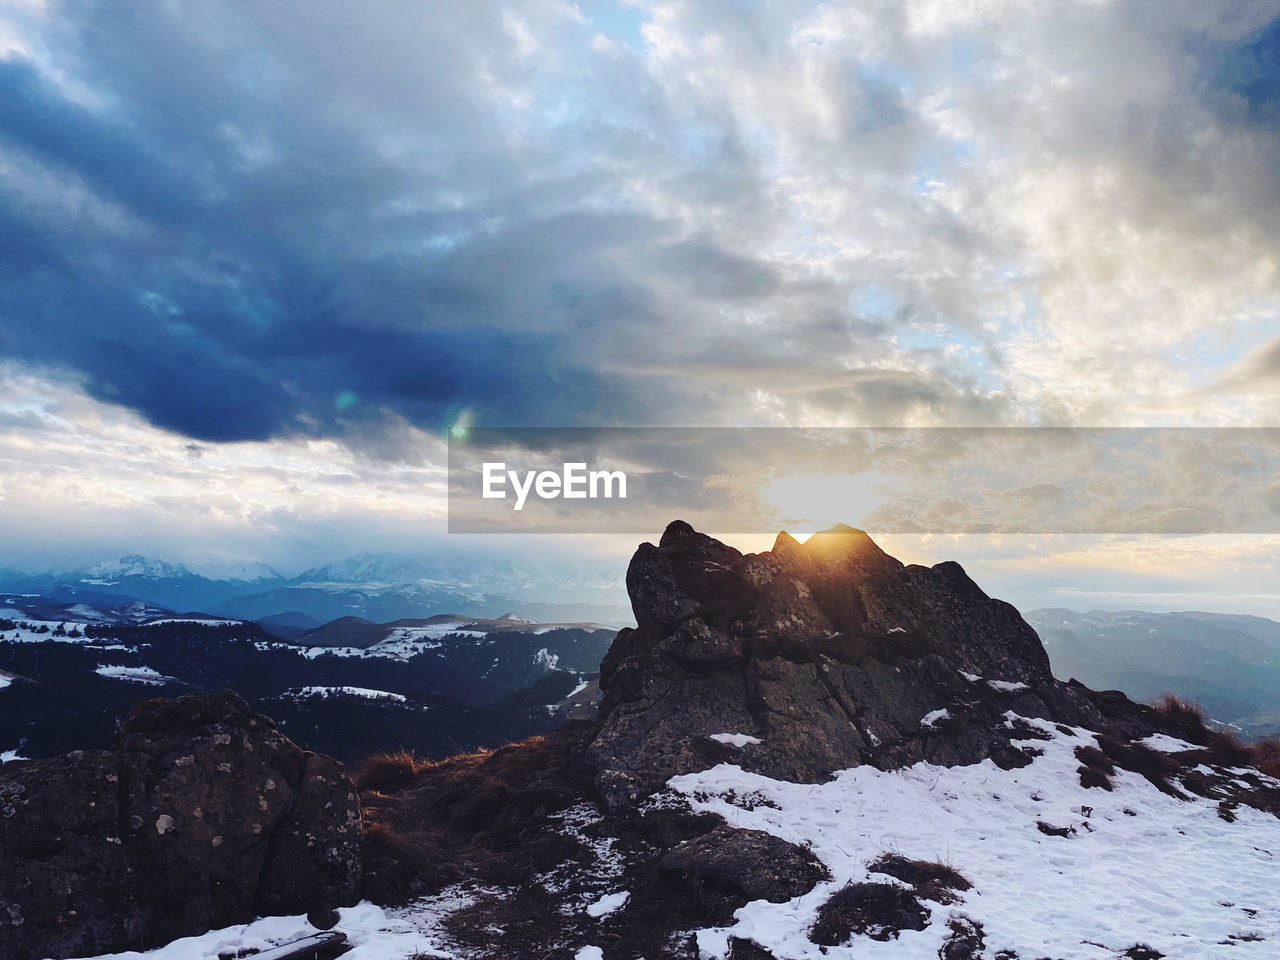 SCENIC VIEW OF SNOWCAPPED MOUNTAINS DURING SUNSET